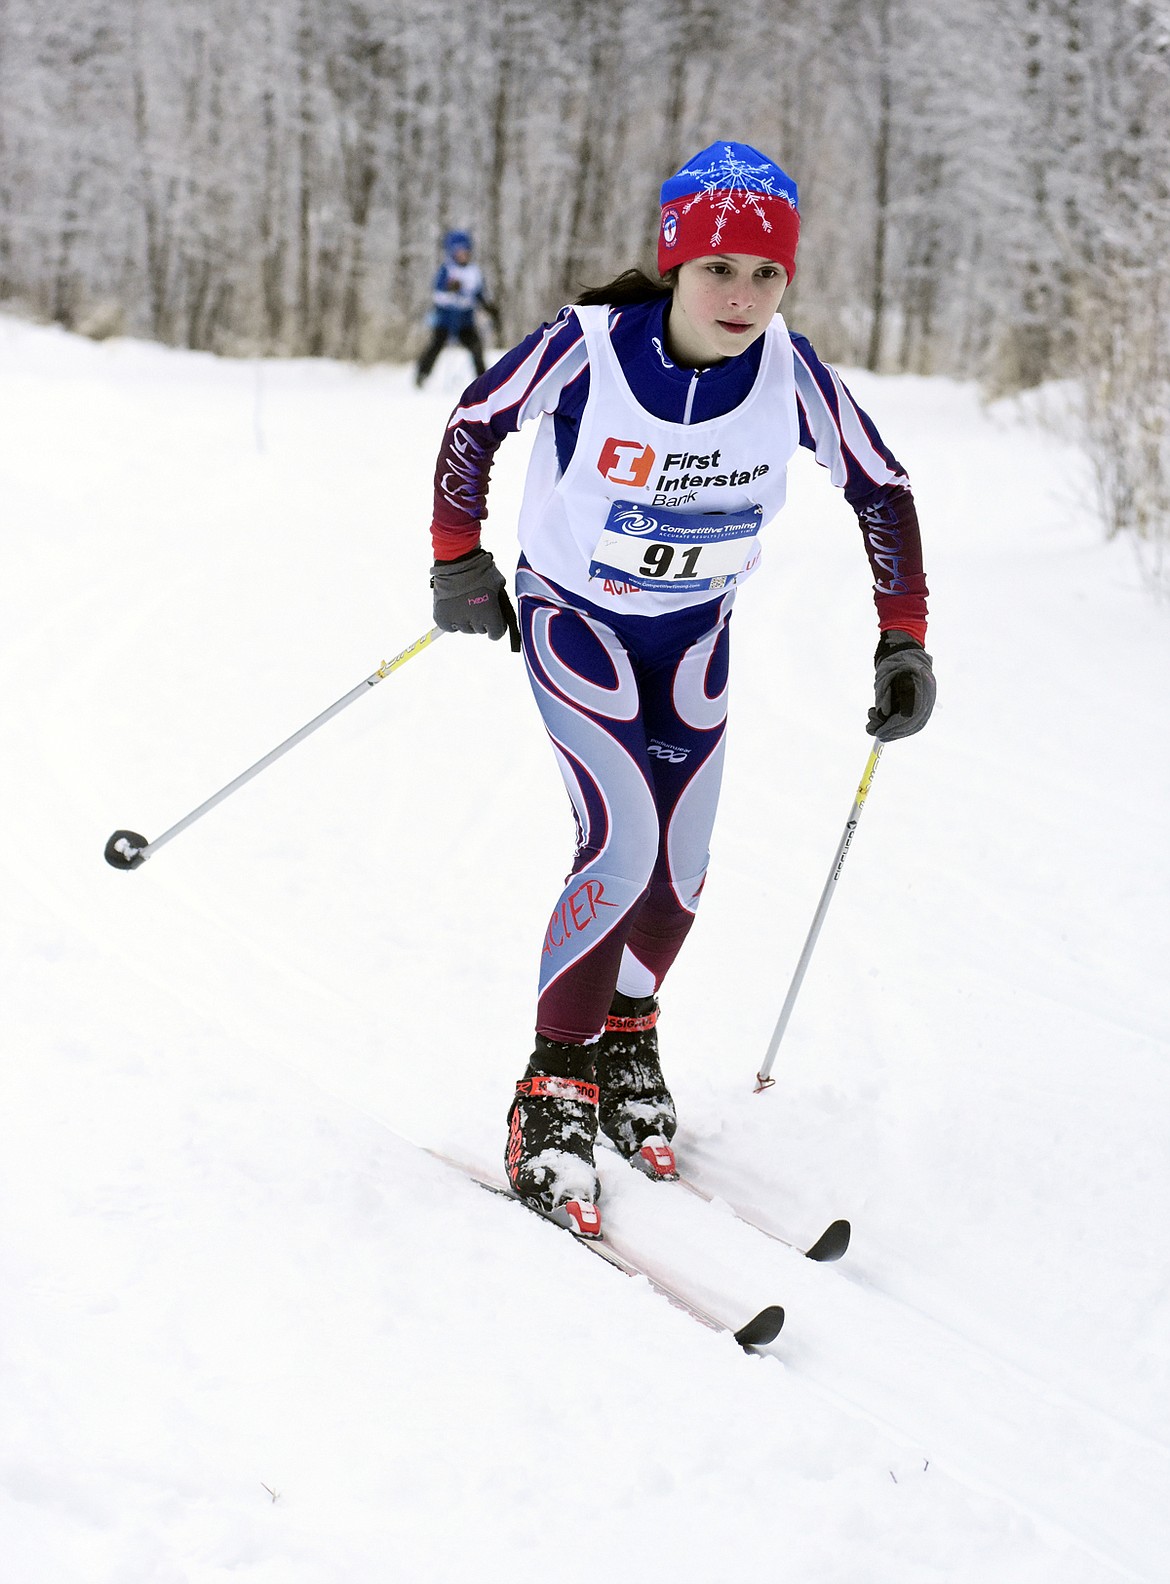 Iona Sarraille of Whitefish skies in the 3K classic race at the annual Glacier Glide on Sunday at the Dog Creek Lodge and Nordic Center in Olney. (Heidi Desch/Whitefish Pilot)